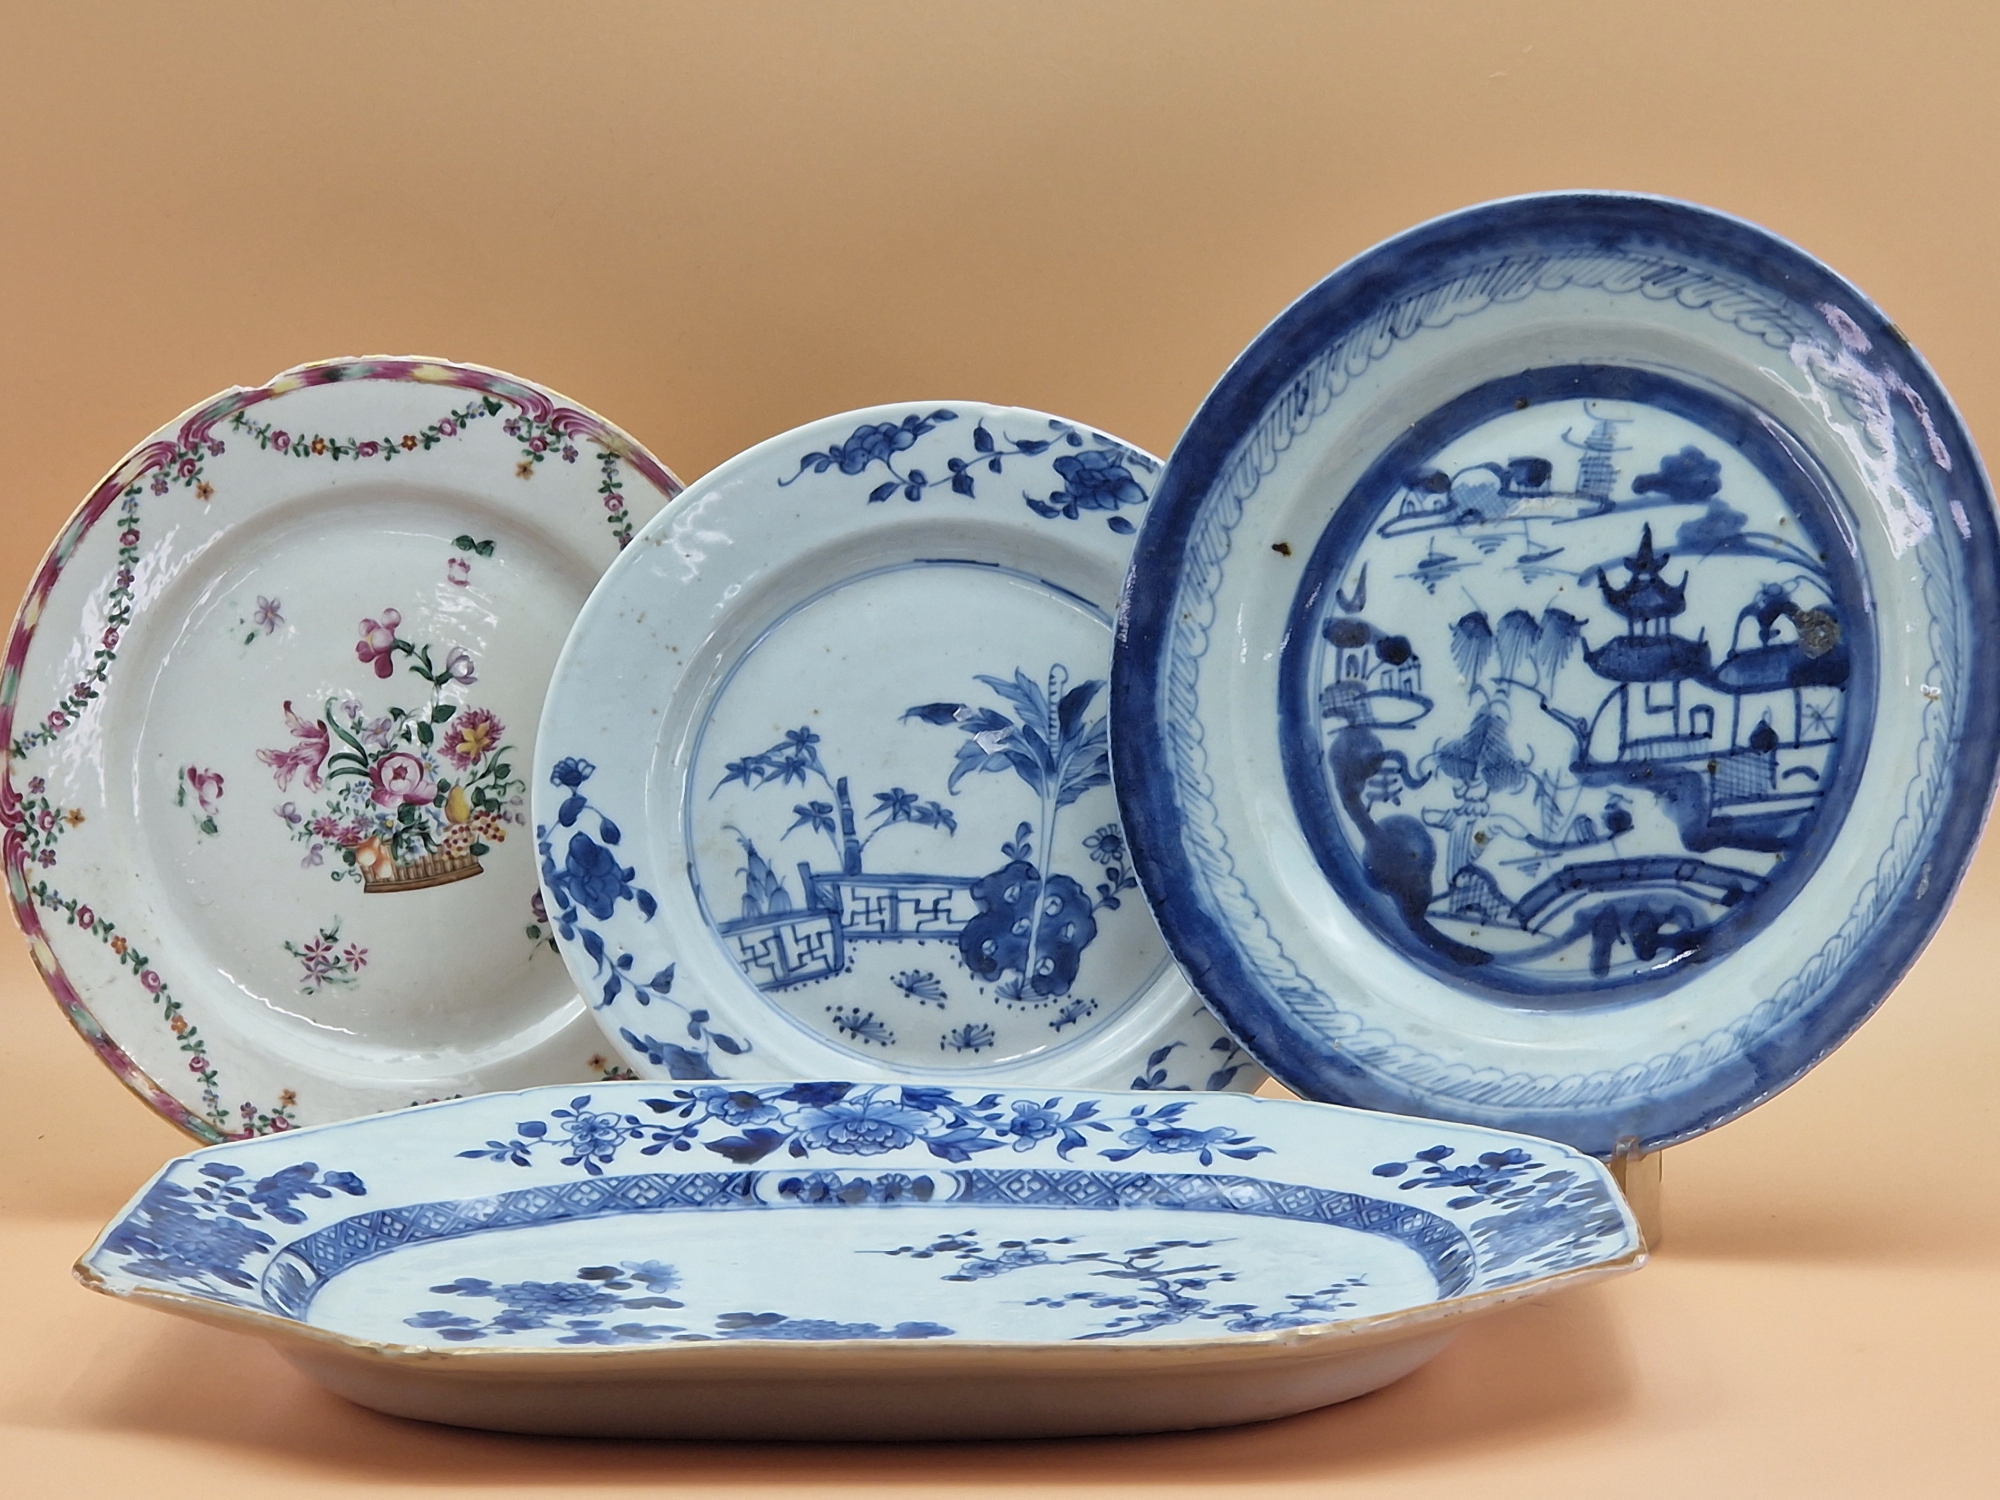 AN 18th C. CHINESE BLUE AND WHITE PLATTER, TWO PLATES, A FAMILLE ROSE PLATE, TWO BOWLS, A SPOON, A